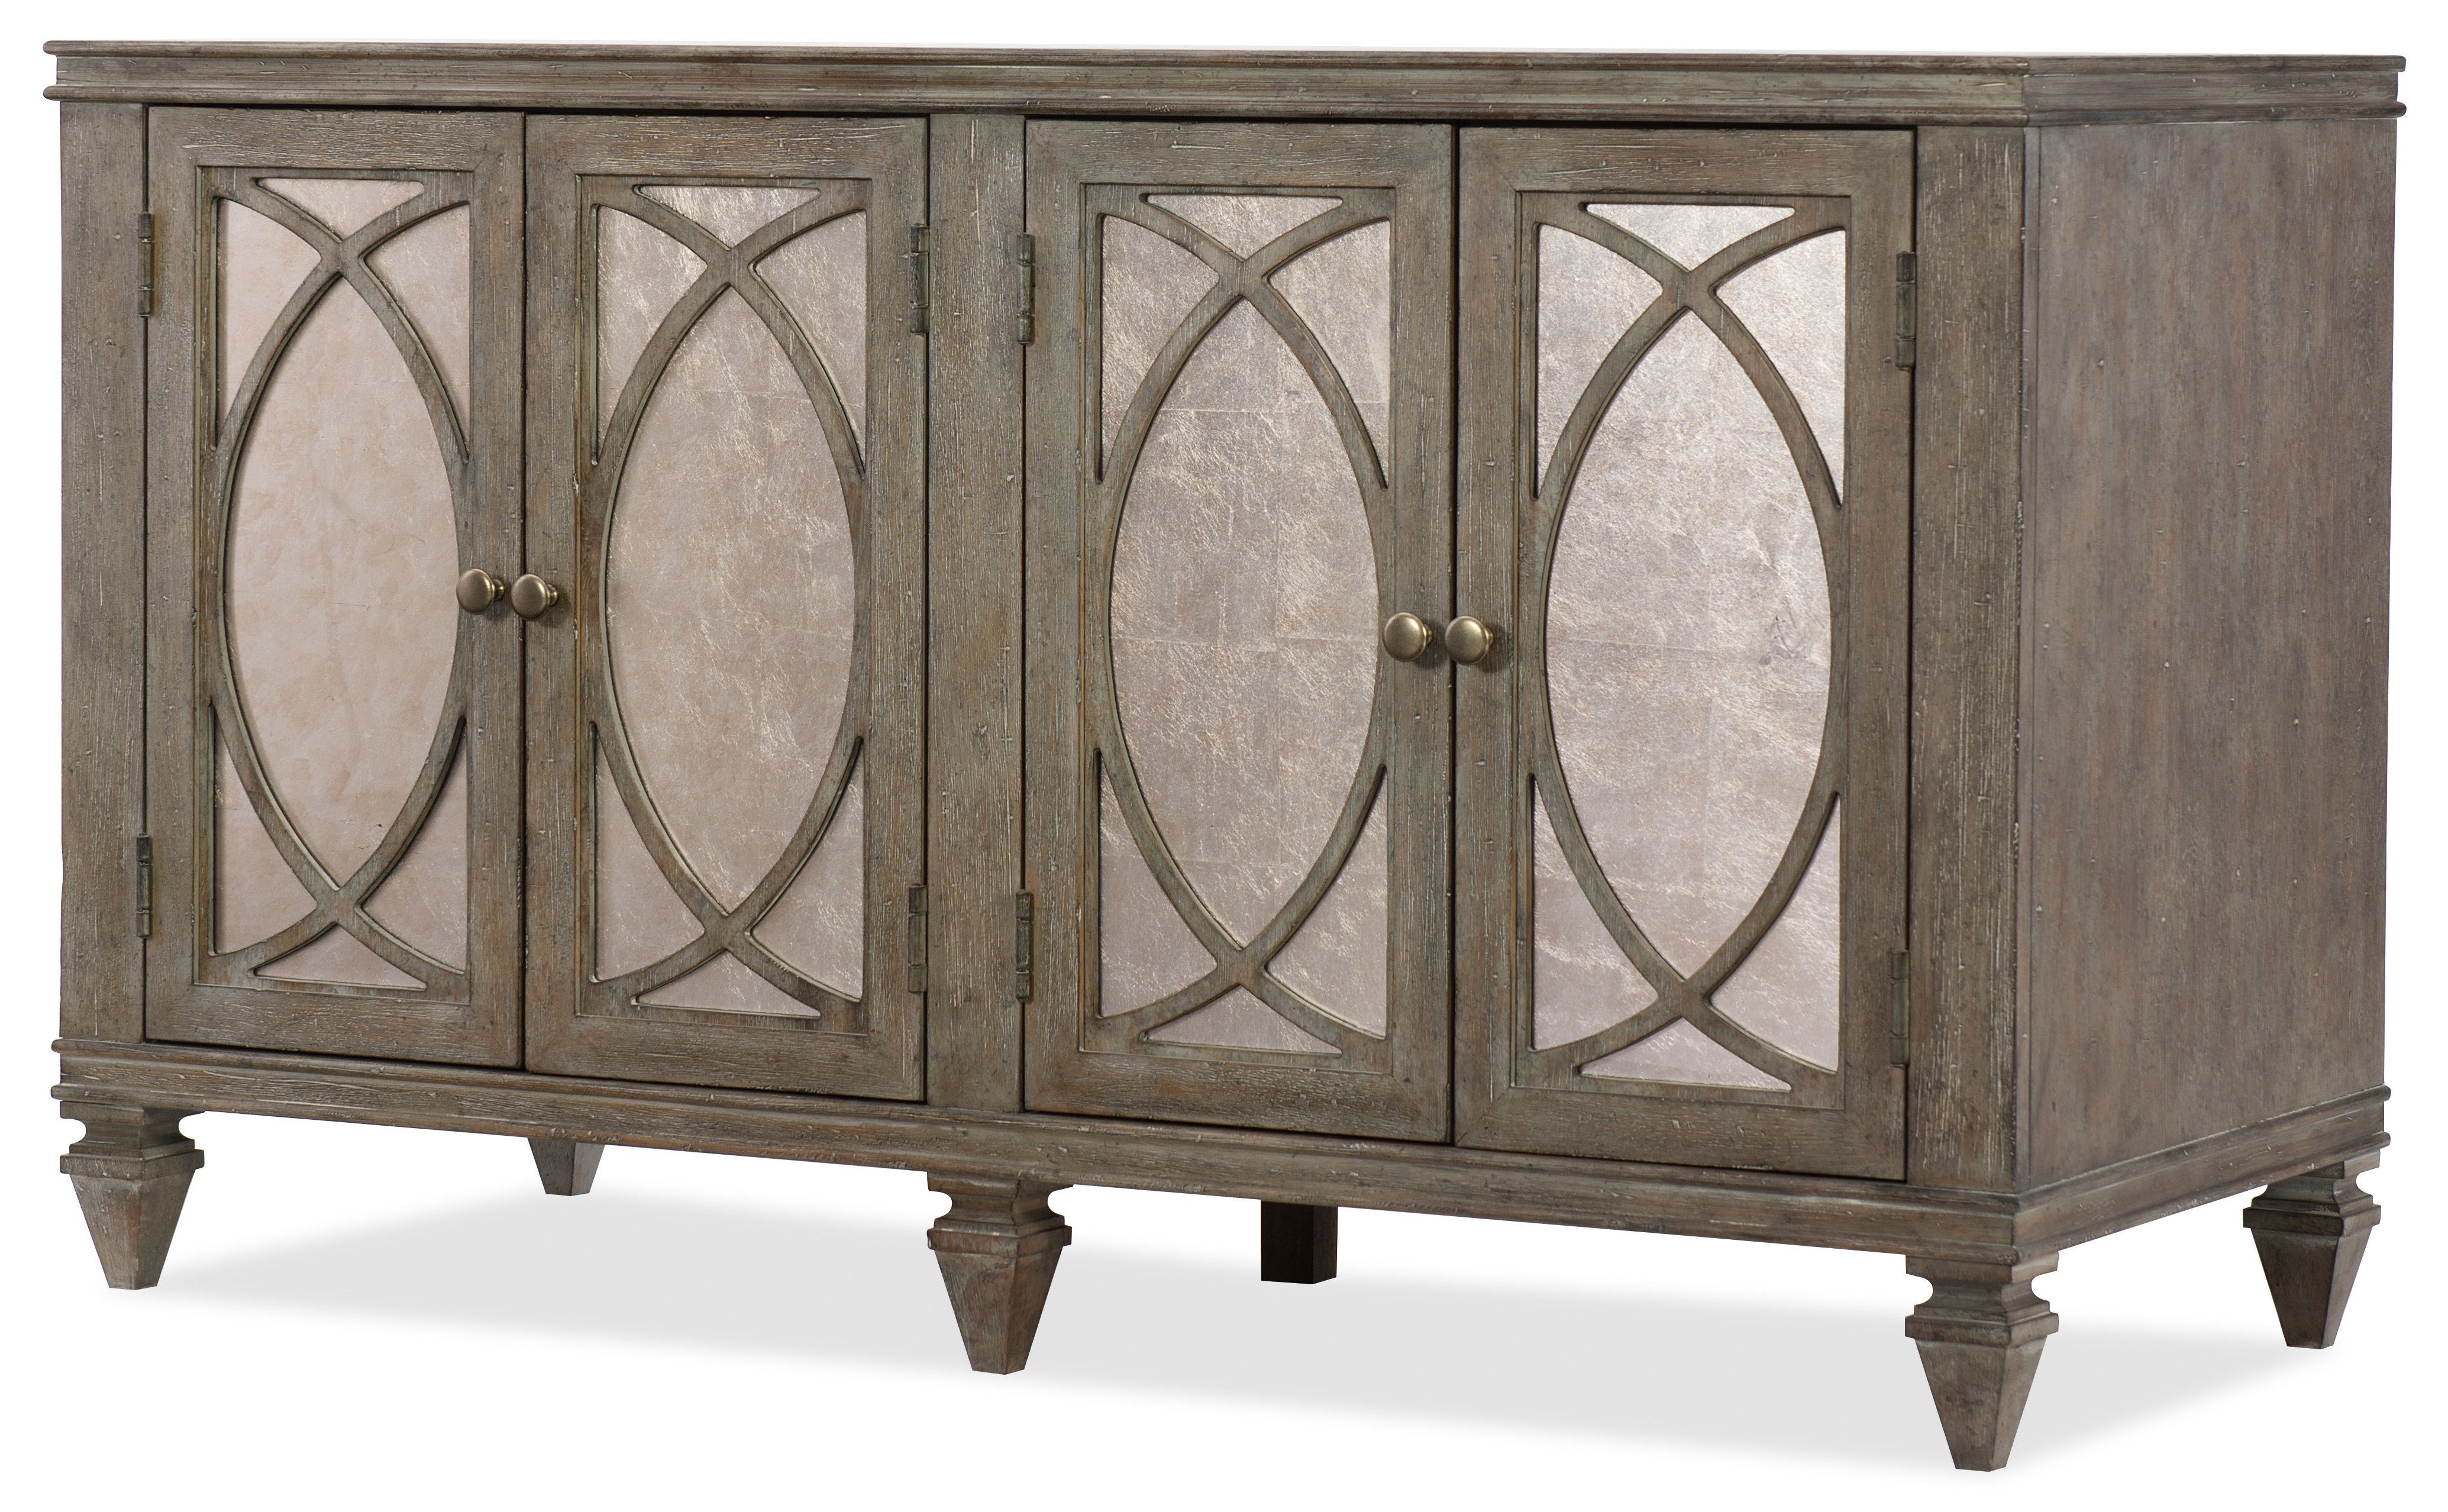 Hooker Furniture Yowell Credenza Pertaining To Candace Door Credenzas (Gallery 18 of 20)